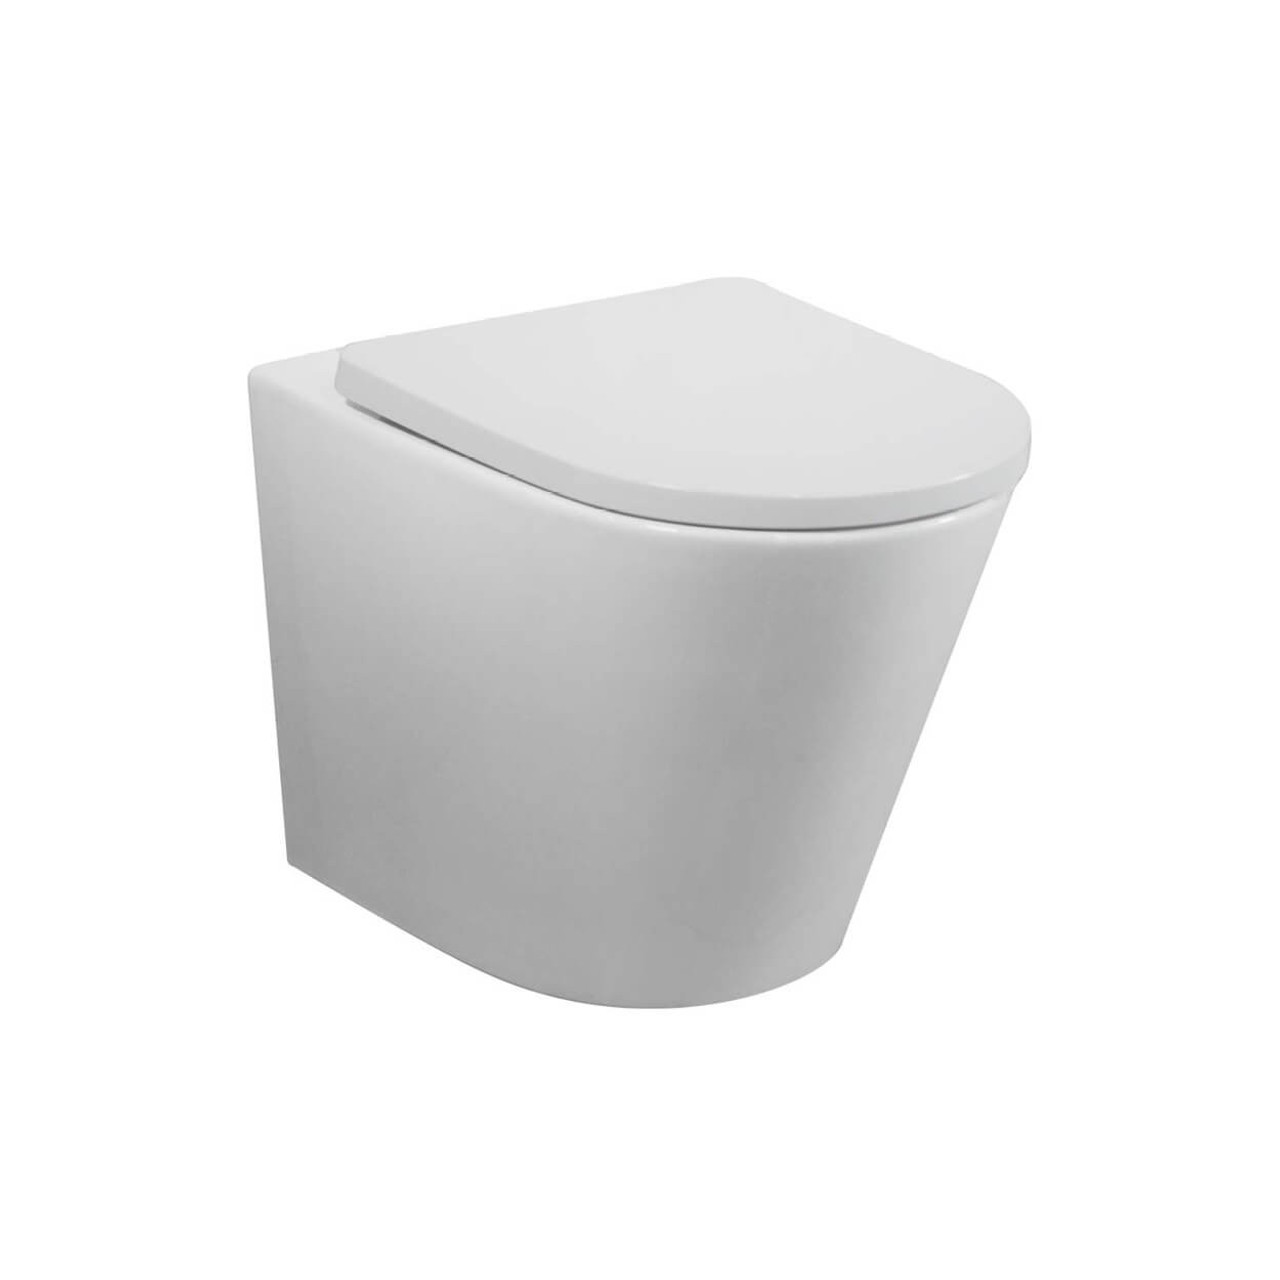  Argent Grace Neu HF WF Toilet Wall Faced Package 